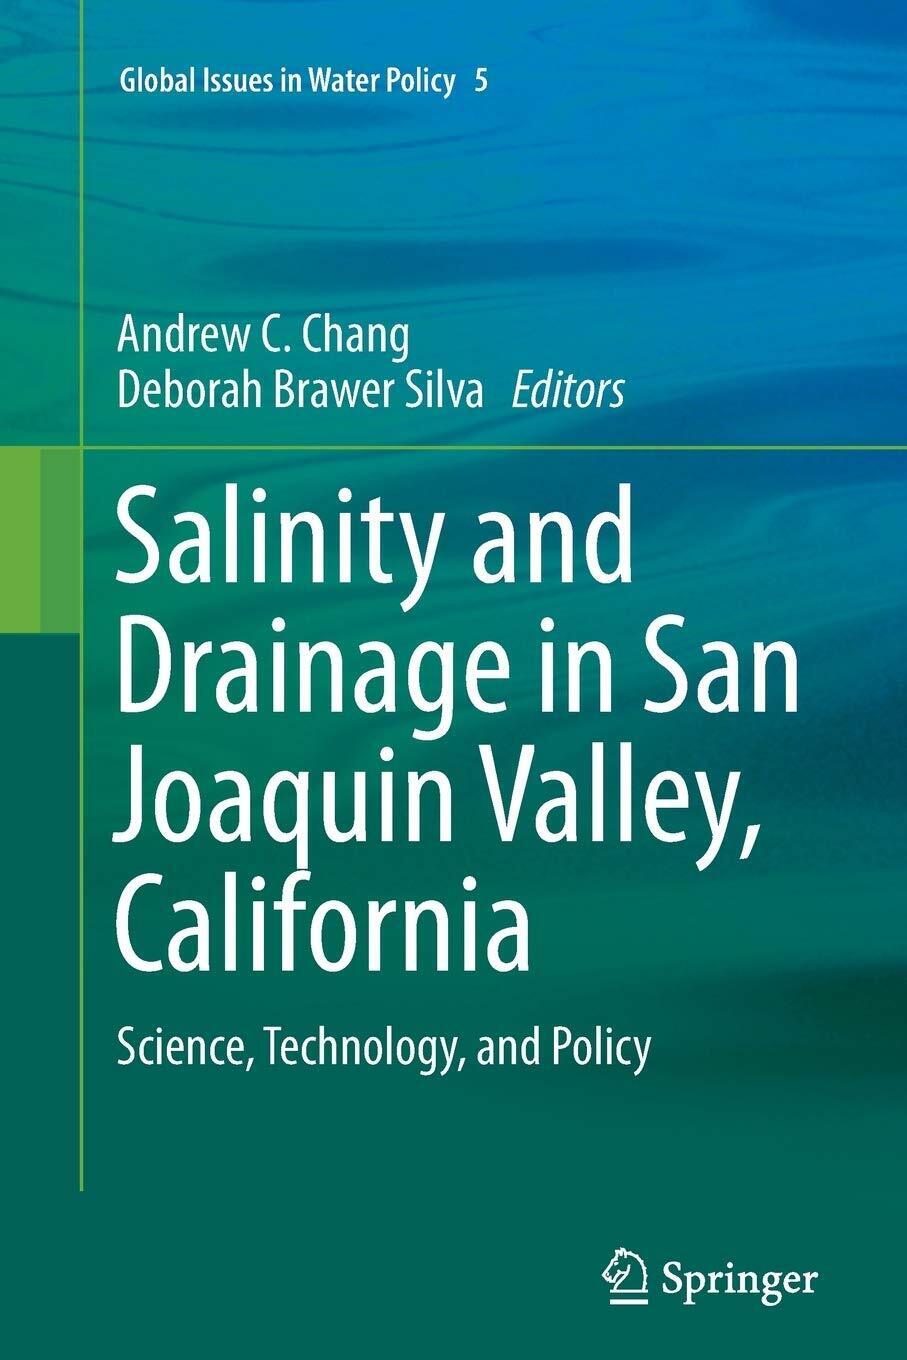 Salinity and Drainage in San Joaquin Valley, California - Andrew C. Chang - 2016